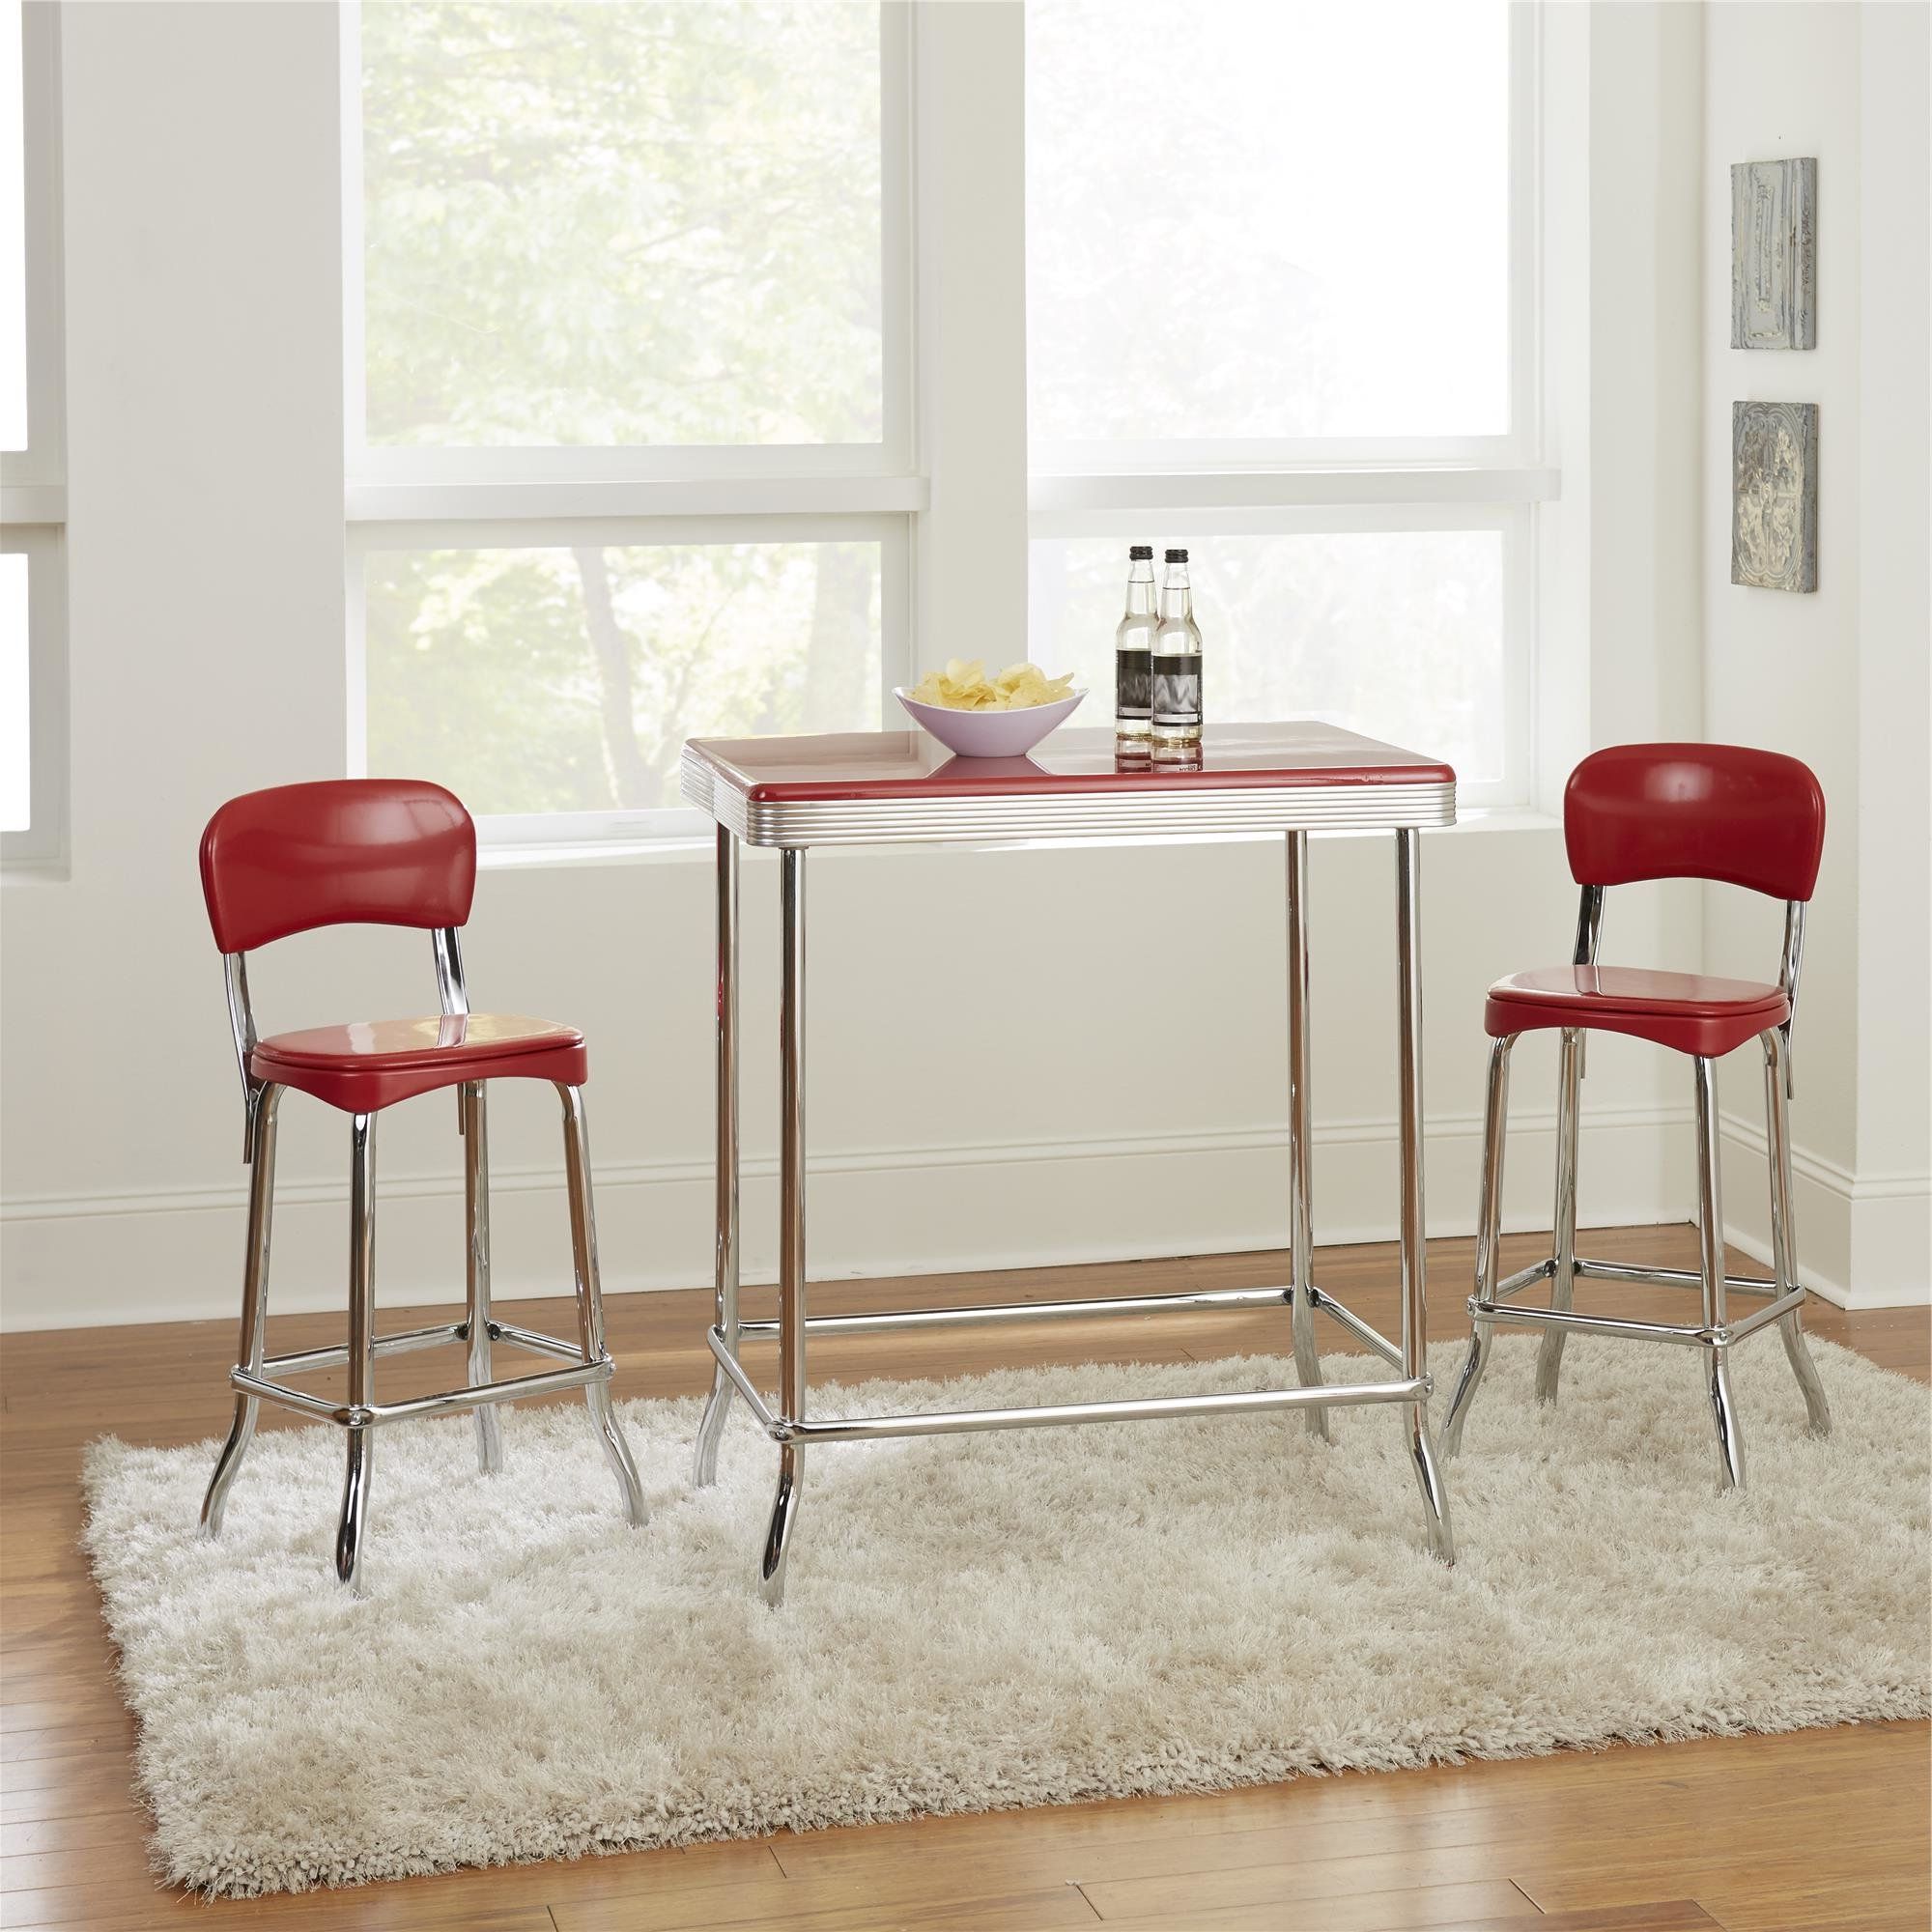 Widely Used Bate Red Retro 3 Piece Dining Set In Bate Red Retro 3 Piece Dining Sets (View 1 of 20)